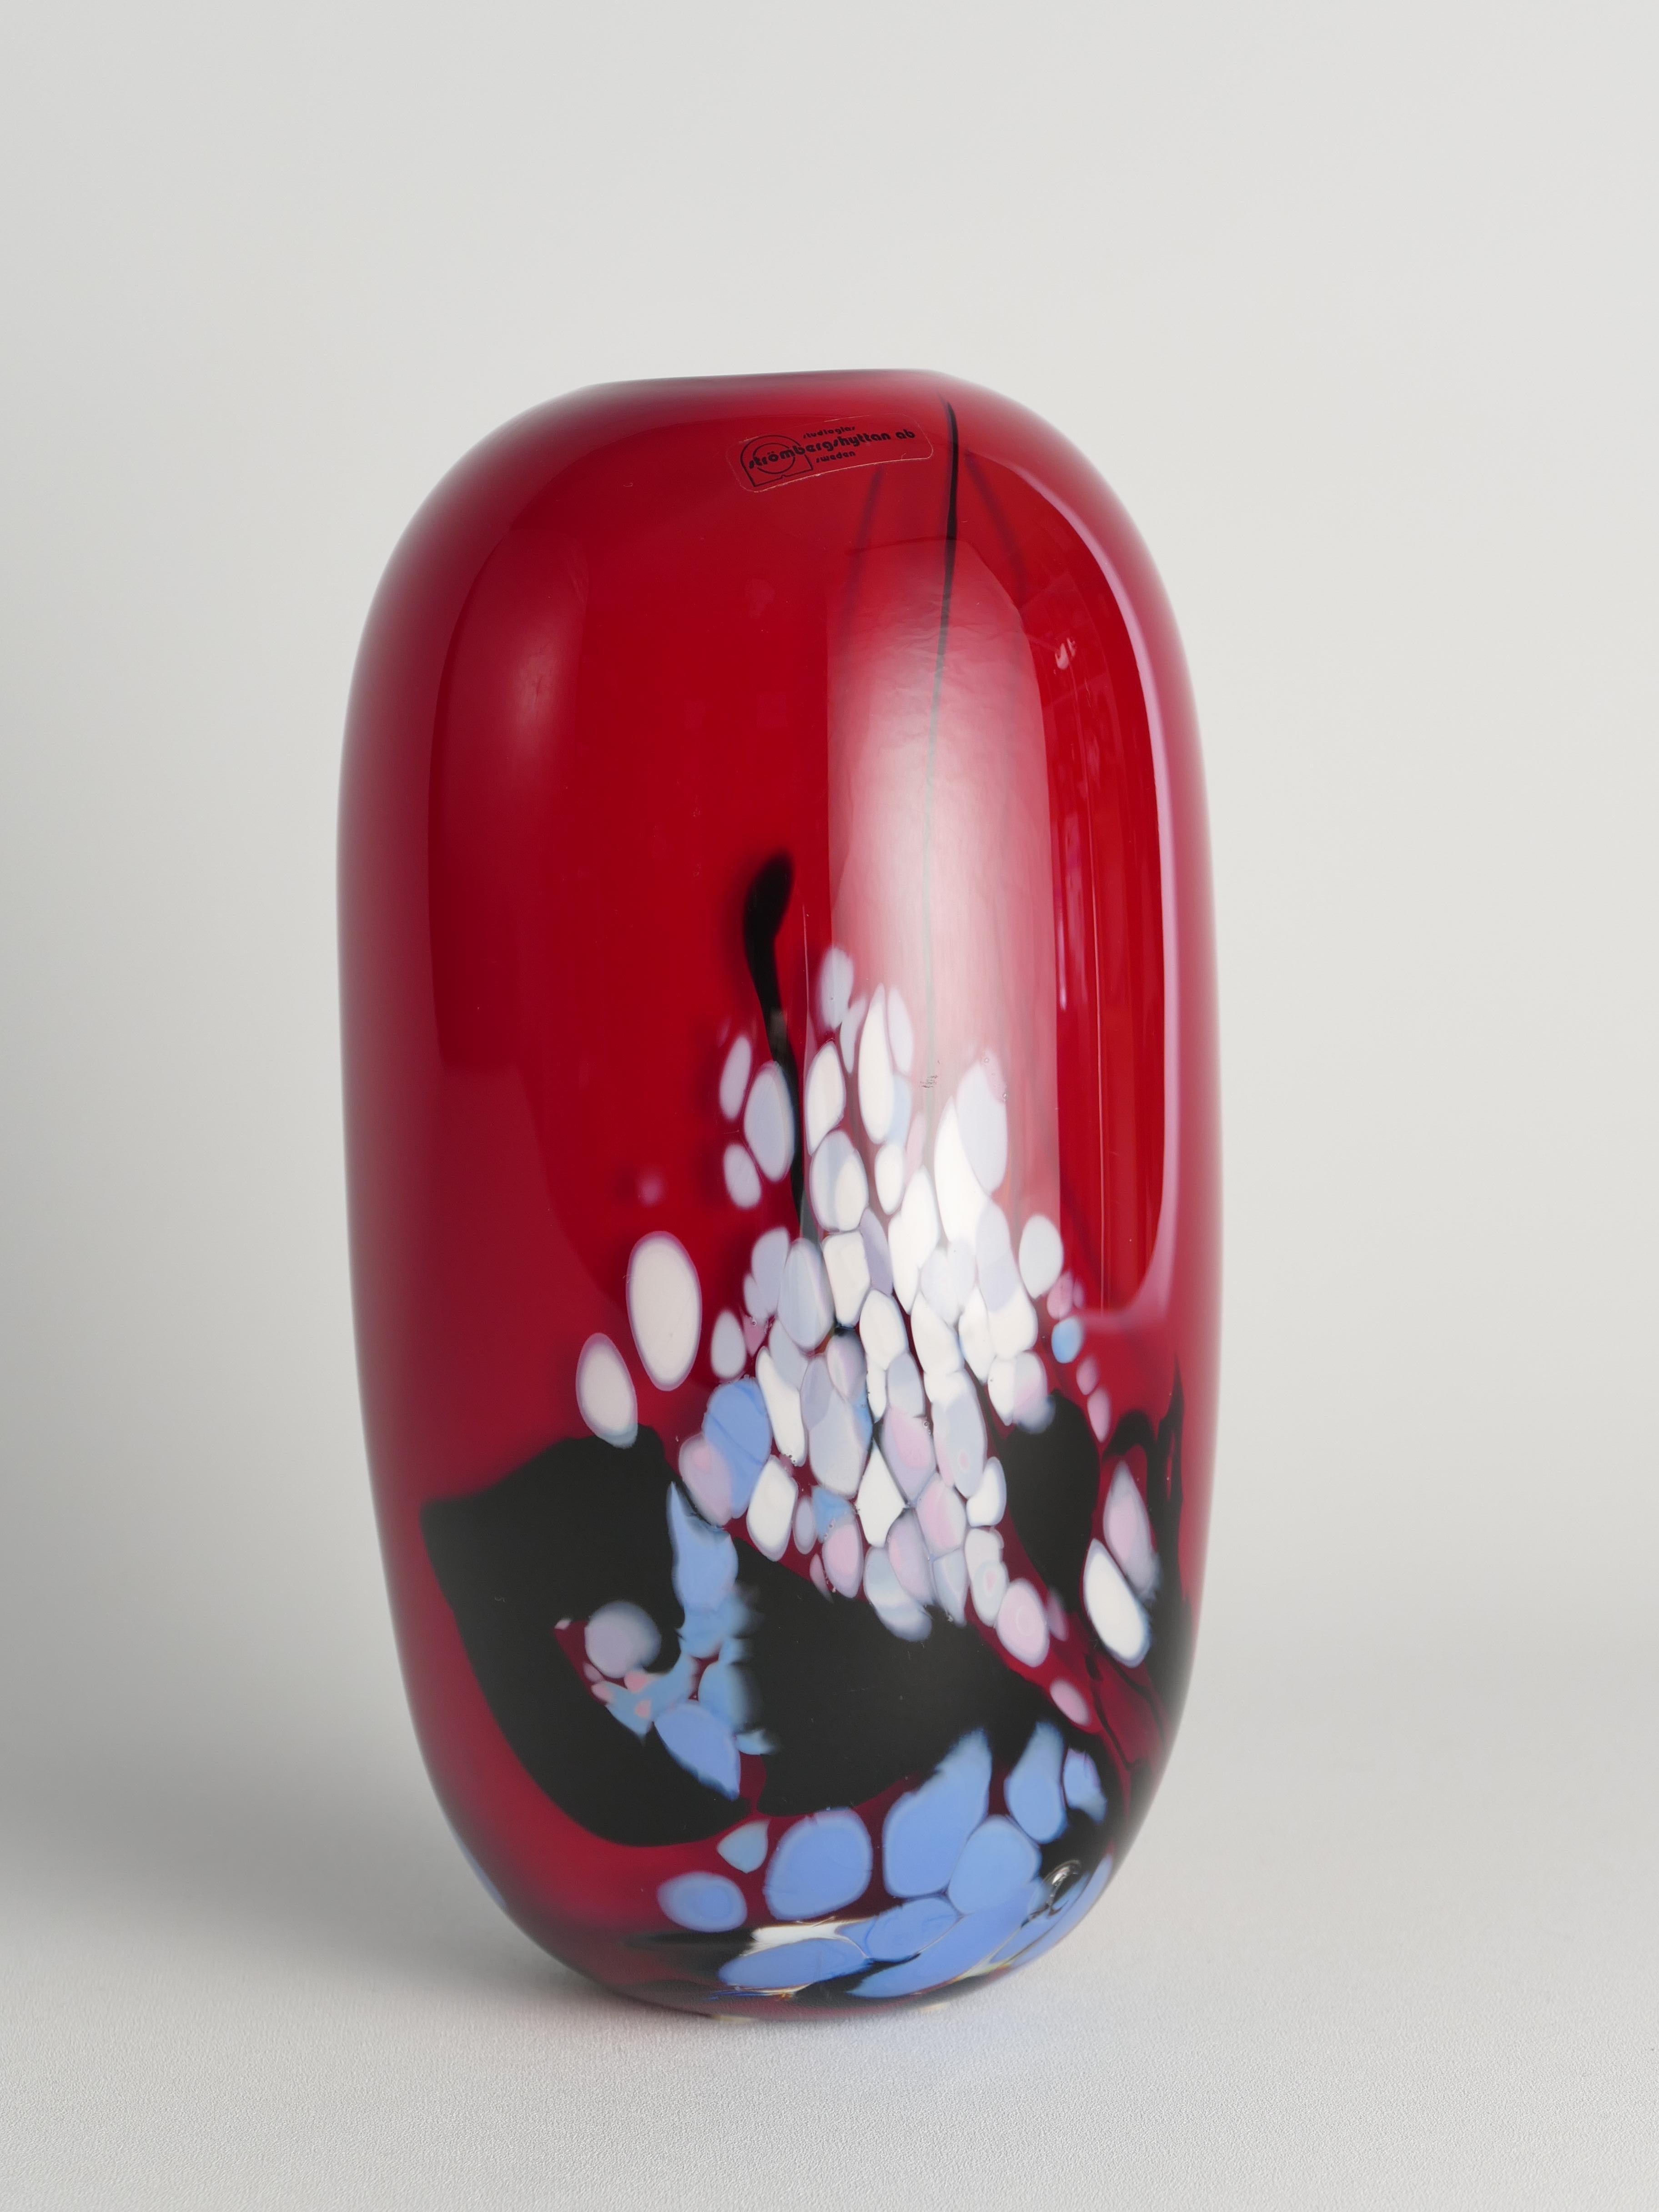 Unique Cherry Red Art Glass Vase by Mikael Axenbrant, Sweden 1990 For Sale 2